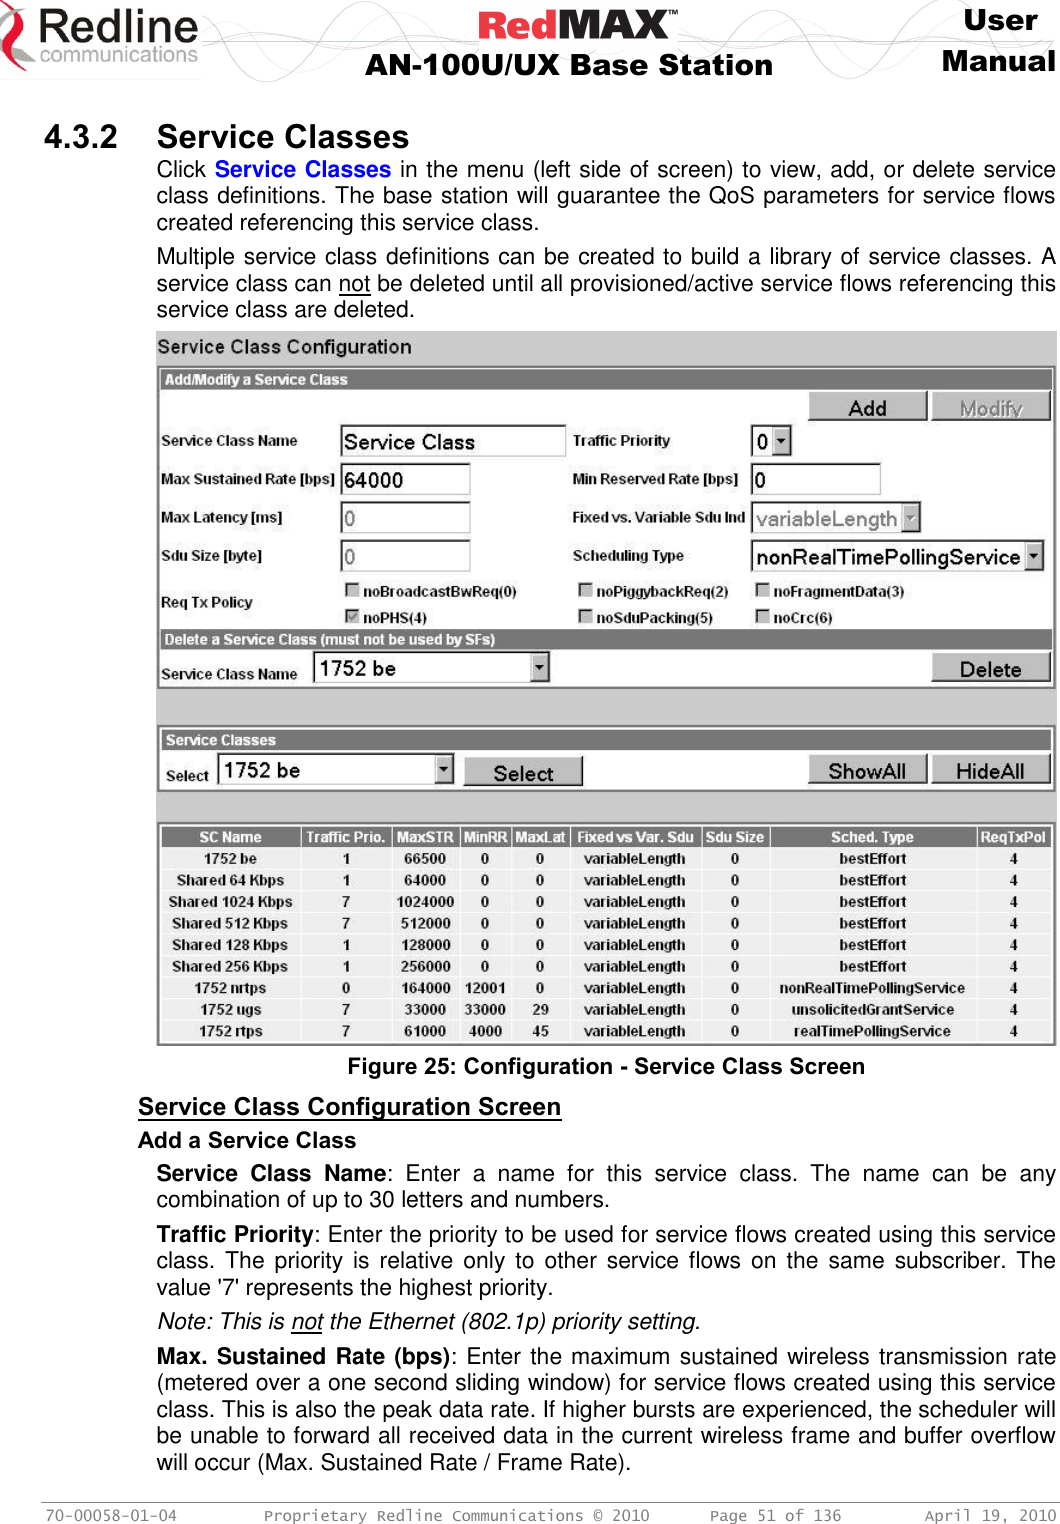     User  AN-100U/UX Base Station Manual   70-00058-01-04  Proprietary Redline Communications © 2010   Page 51 of 136  April 19, 2010  4.3.2 Service Classes Click Service Classes in the menu (left side of screen) to view, add, or delete service class definitions. The base station will guarantee the QoS parameters for service flows created referencing this service class. Multiple service class definitions can be created to build a library of service classes. A service class can not be deleted until all provisioned/active service flows referencing this service class are deleted.  Figure 25: Configuration - Service Class Screen Service Class Configuration Screen Add a Service Class Service  Class  Name:  Enter  a  name  for  this  service  class.  The  name  can  be  any combination of up to 30 letters and numbers. Traffic Priority: Enter the priority to be used for service flows created using this service class. The  priority is  relative only  to  other  service flows on  the  same  subscriber. The value &apos;7&apos; represents the highest priority. Note: This is not the Ethernet (802.1p) priority setting. Max. Sustained Rate (bps): Enter the maximum sustained wireless transmission rate (metered over a one second sliding window) for service flows created using this service class. This is also the peak data rate. If higher bursts are experienced, the scheduler will be unable to forward all received data in the current wireless frame and buffer overflow will occur (Max. Sustained Rate / Frame Rate). 